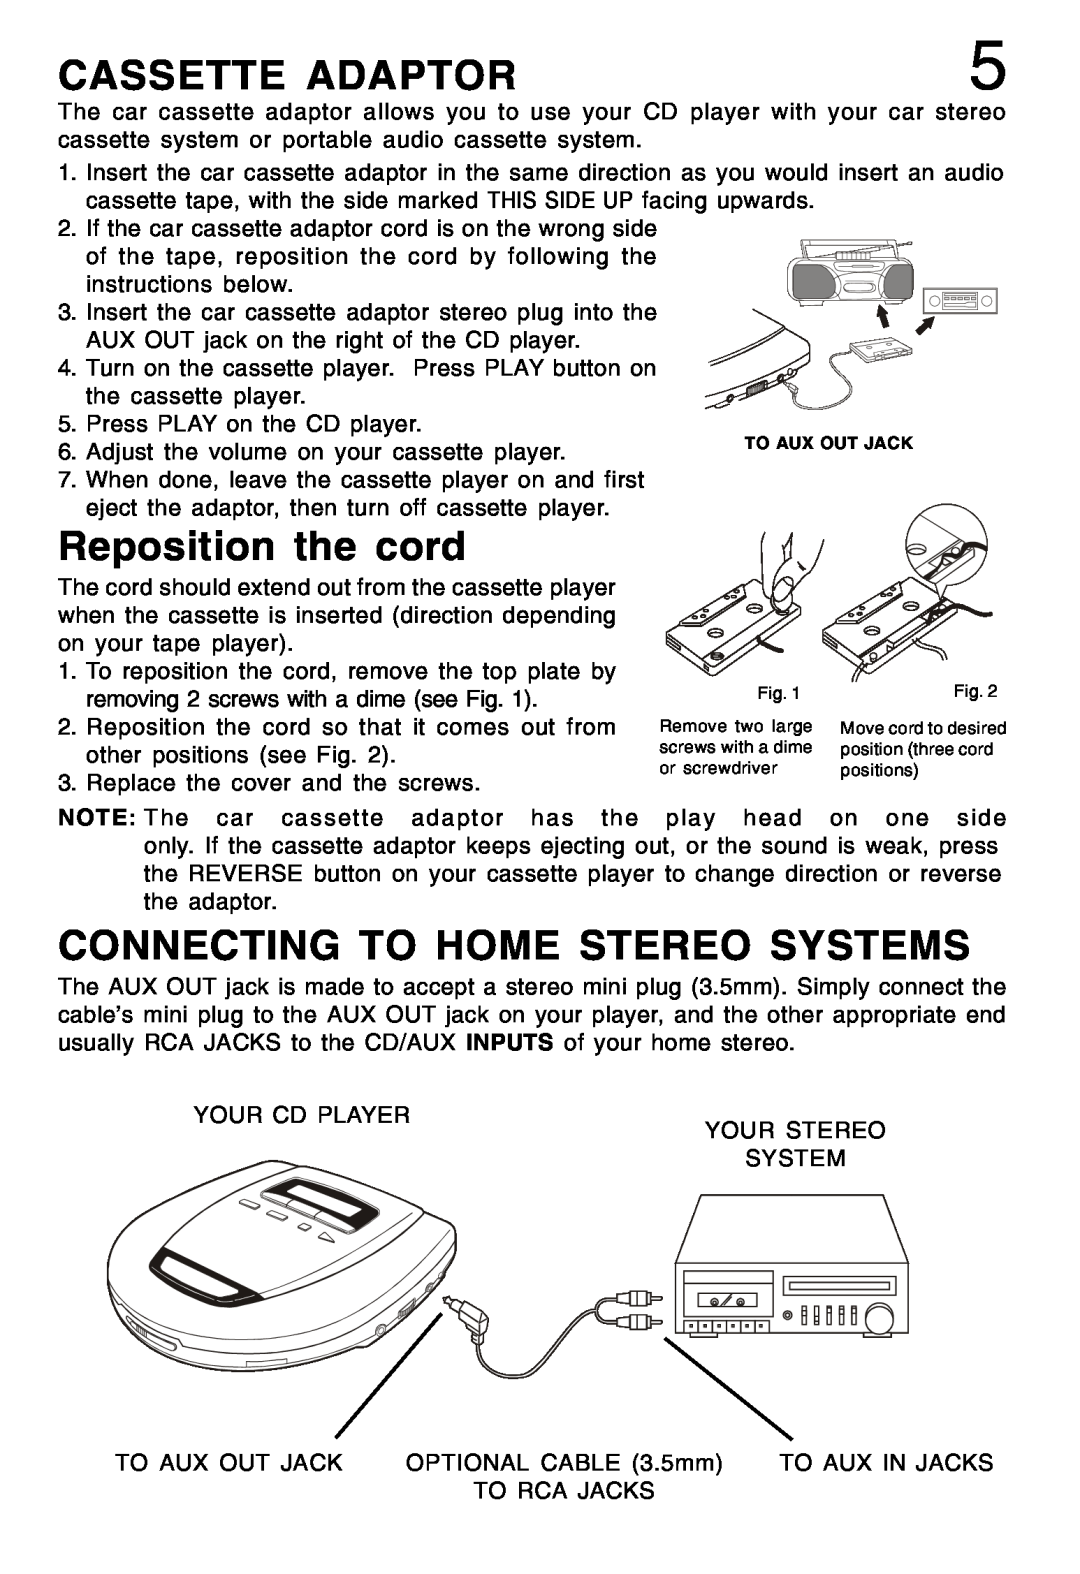 Lenoxx Electronics CD-79 operating instructions Cassette Adaptor, Reposition the cord, Connecting To Home Stereo Systems 